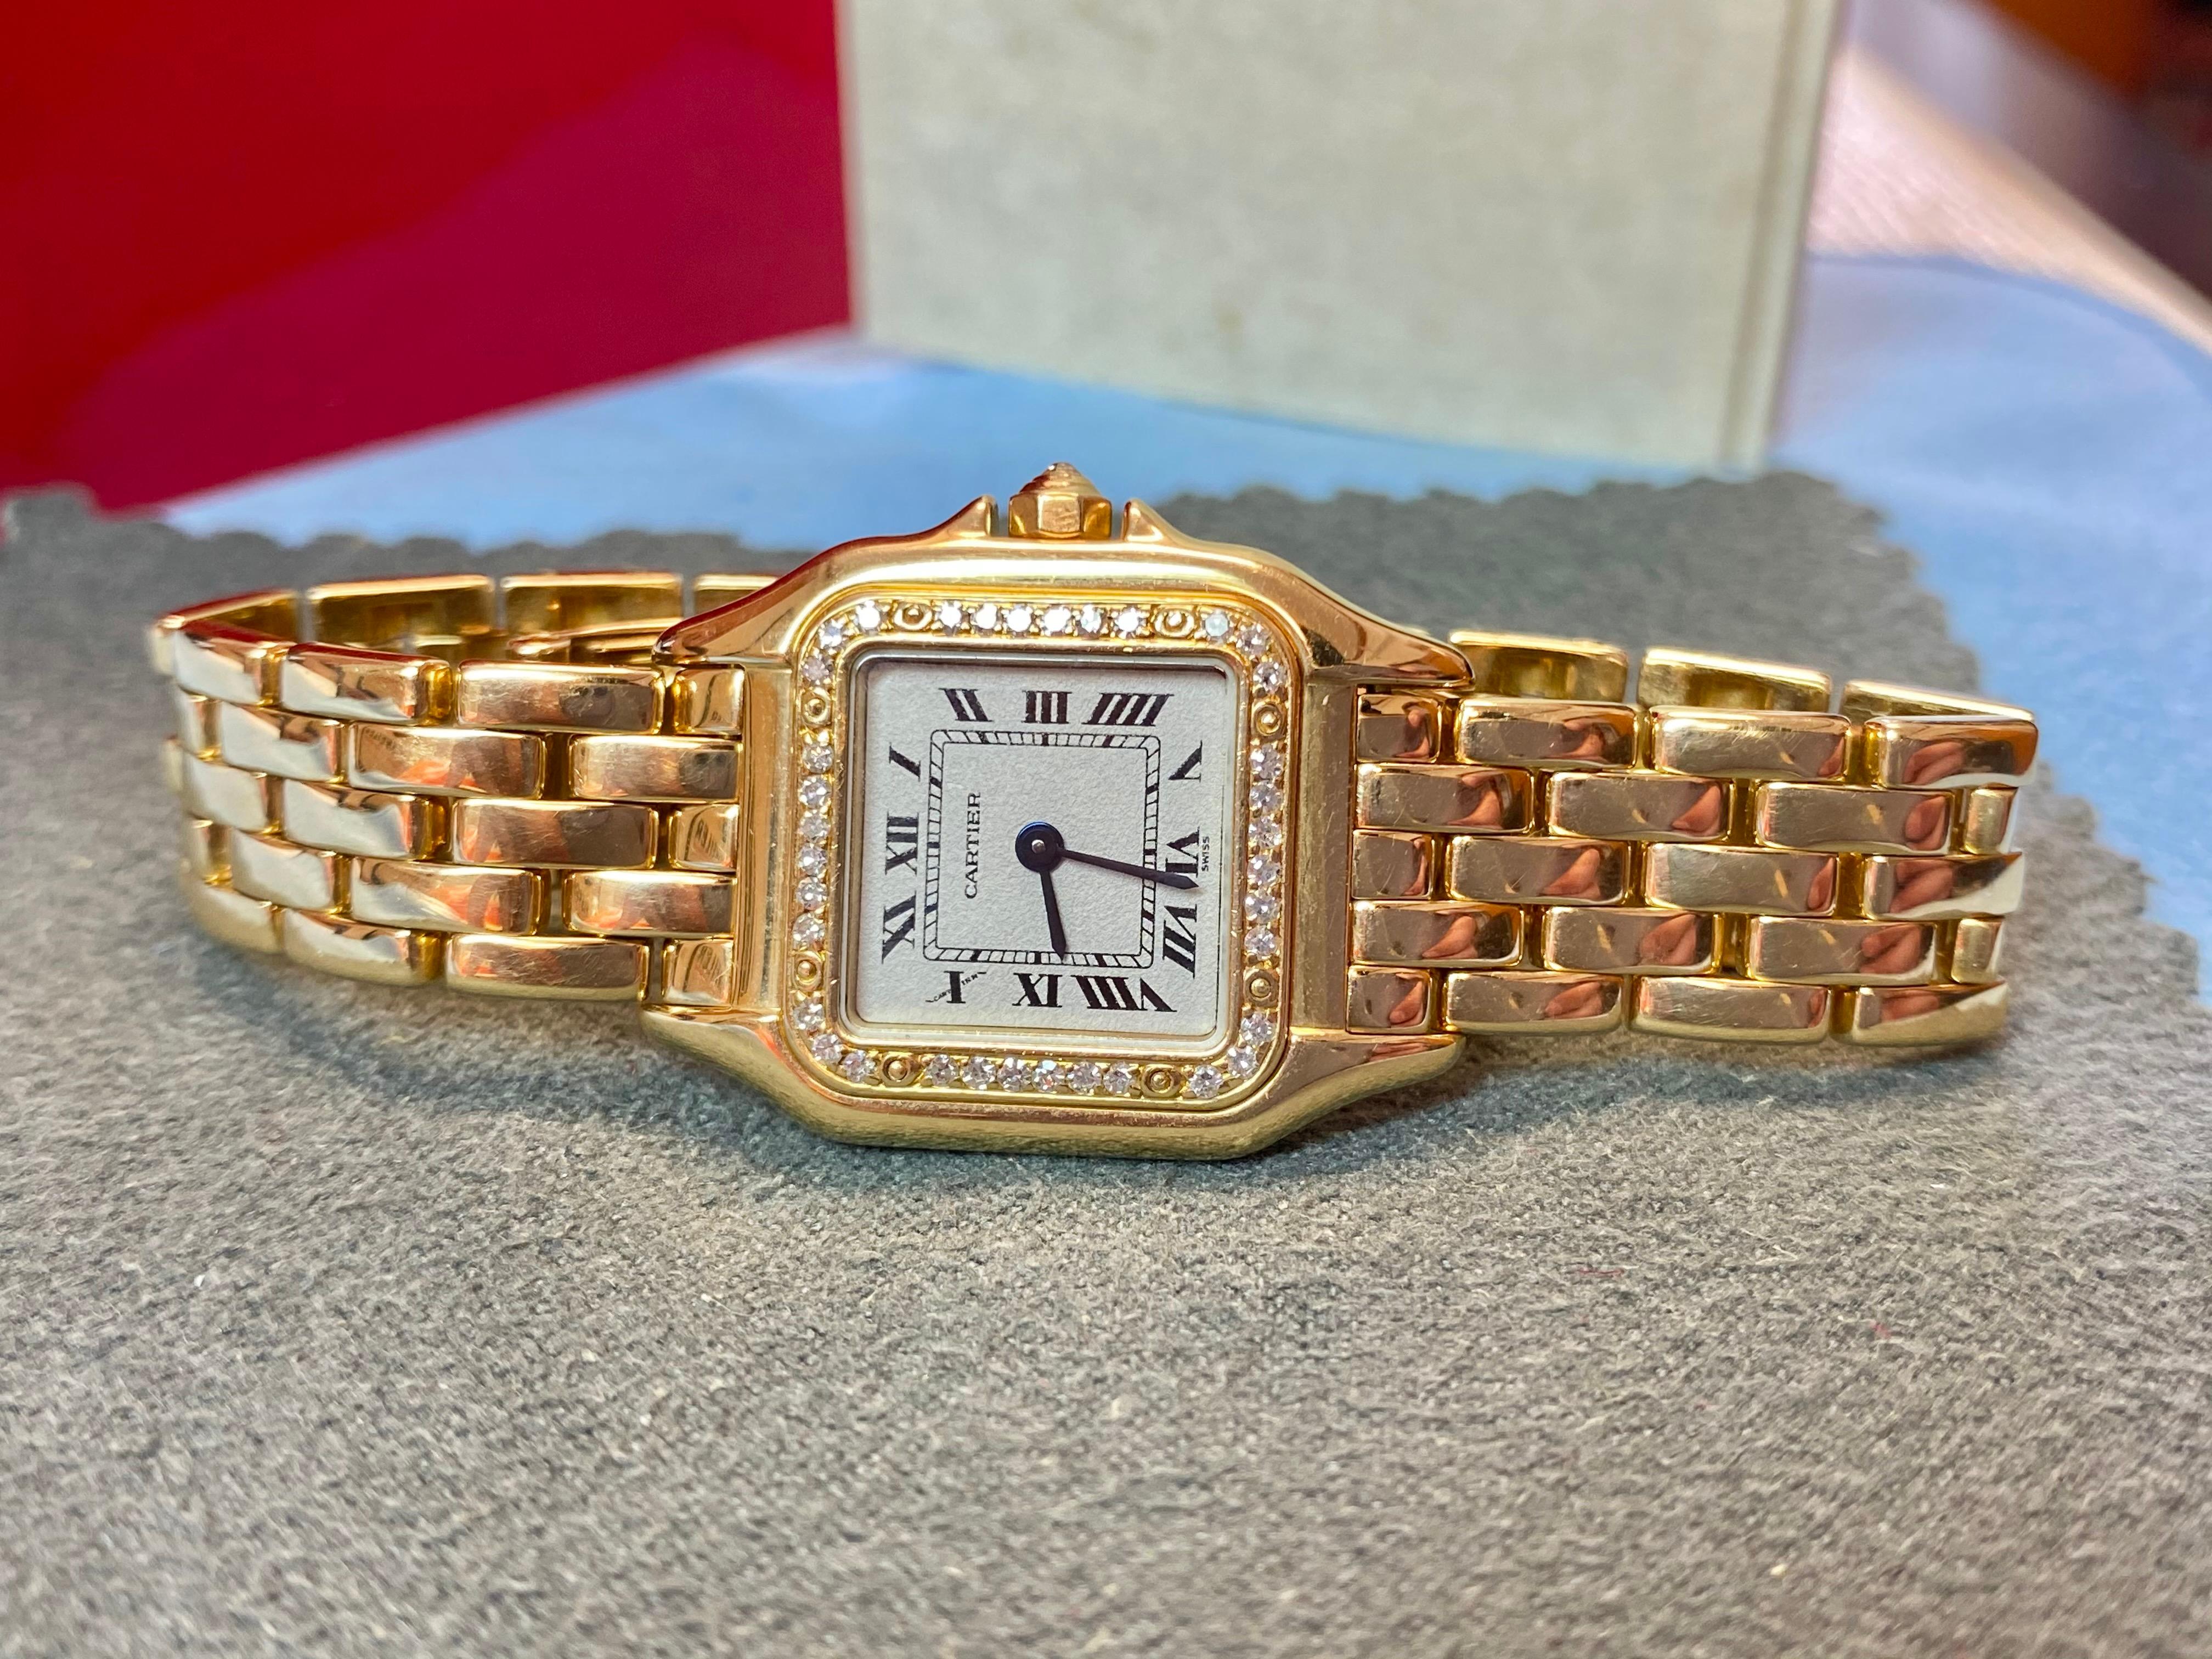 Cartier Panthere Ladies Wristwatch in 18k Gold with Cartier Diamond Bezel 1